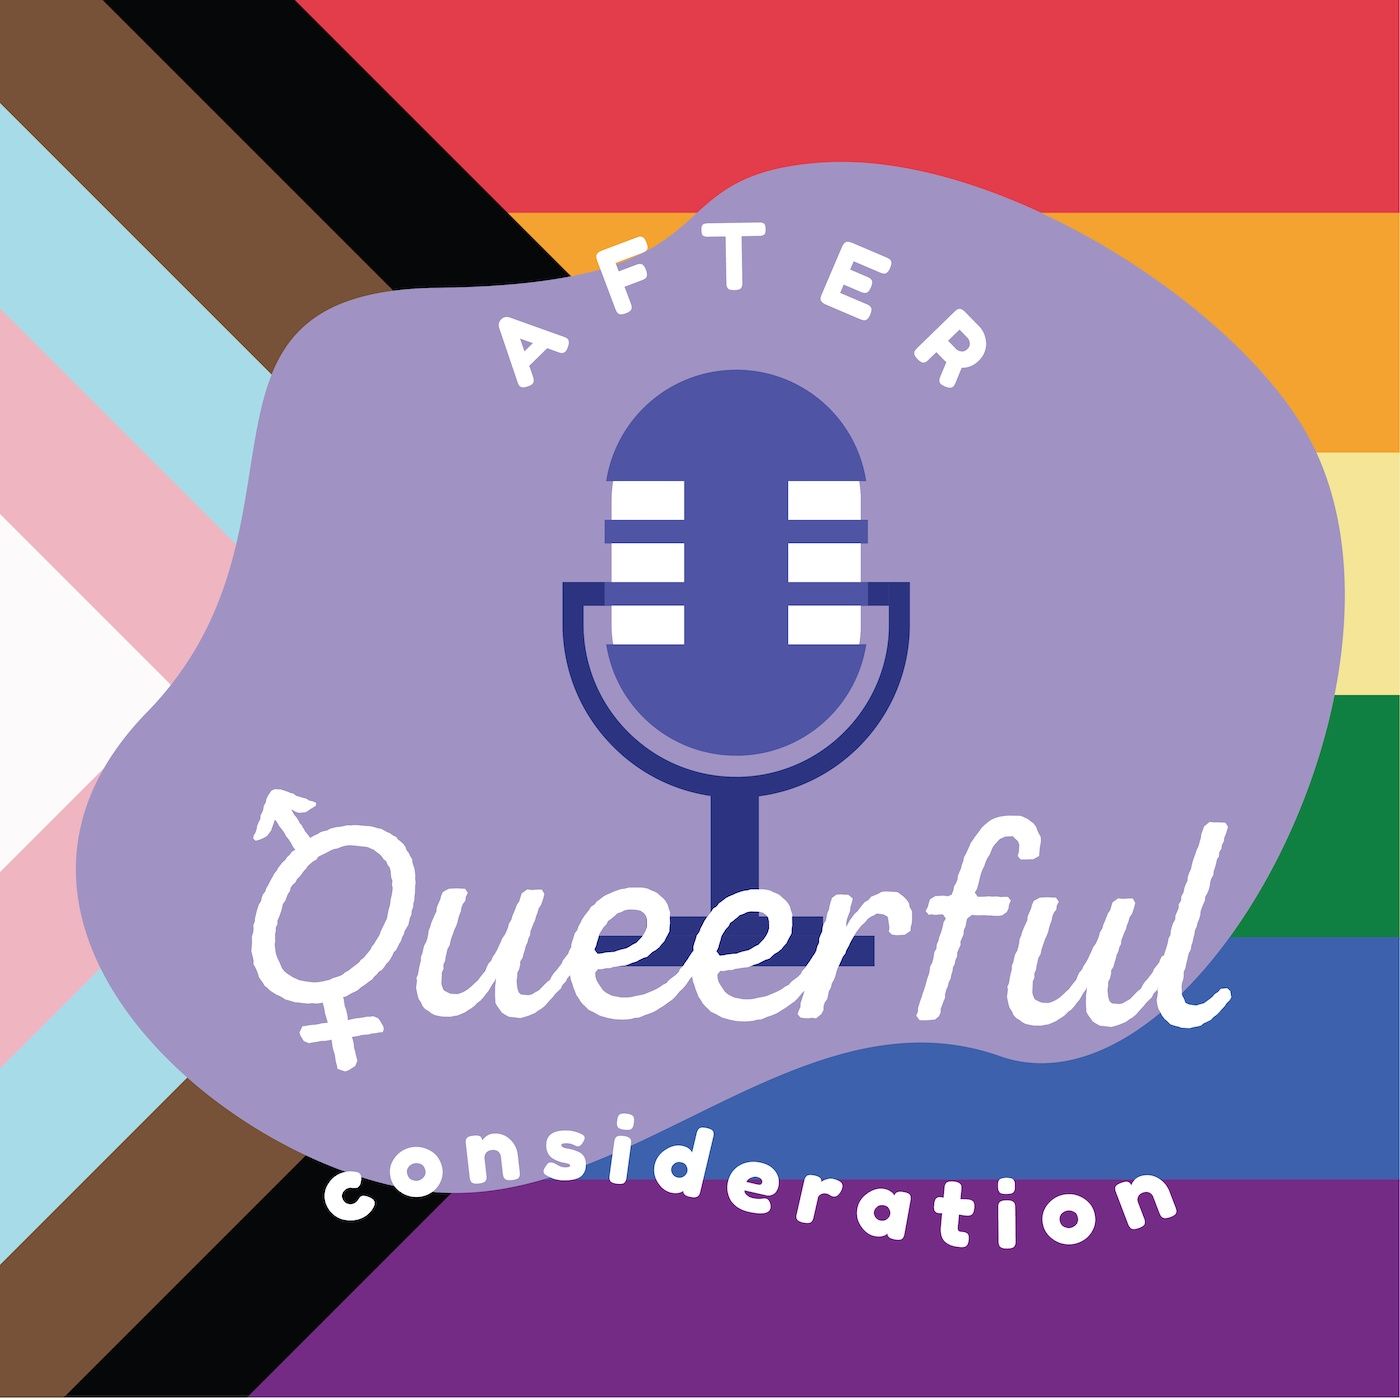 After Queerful Consideration